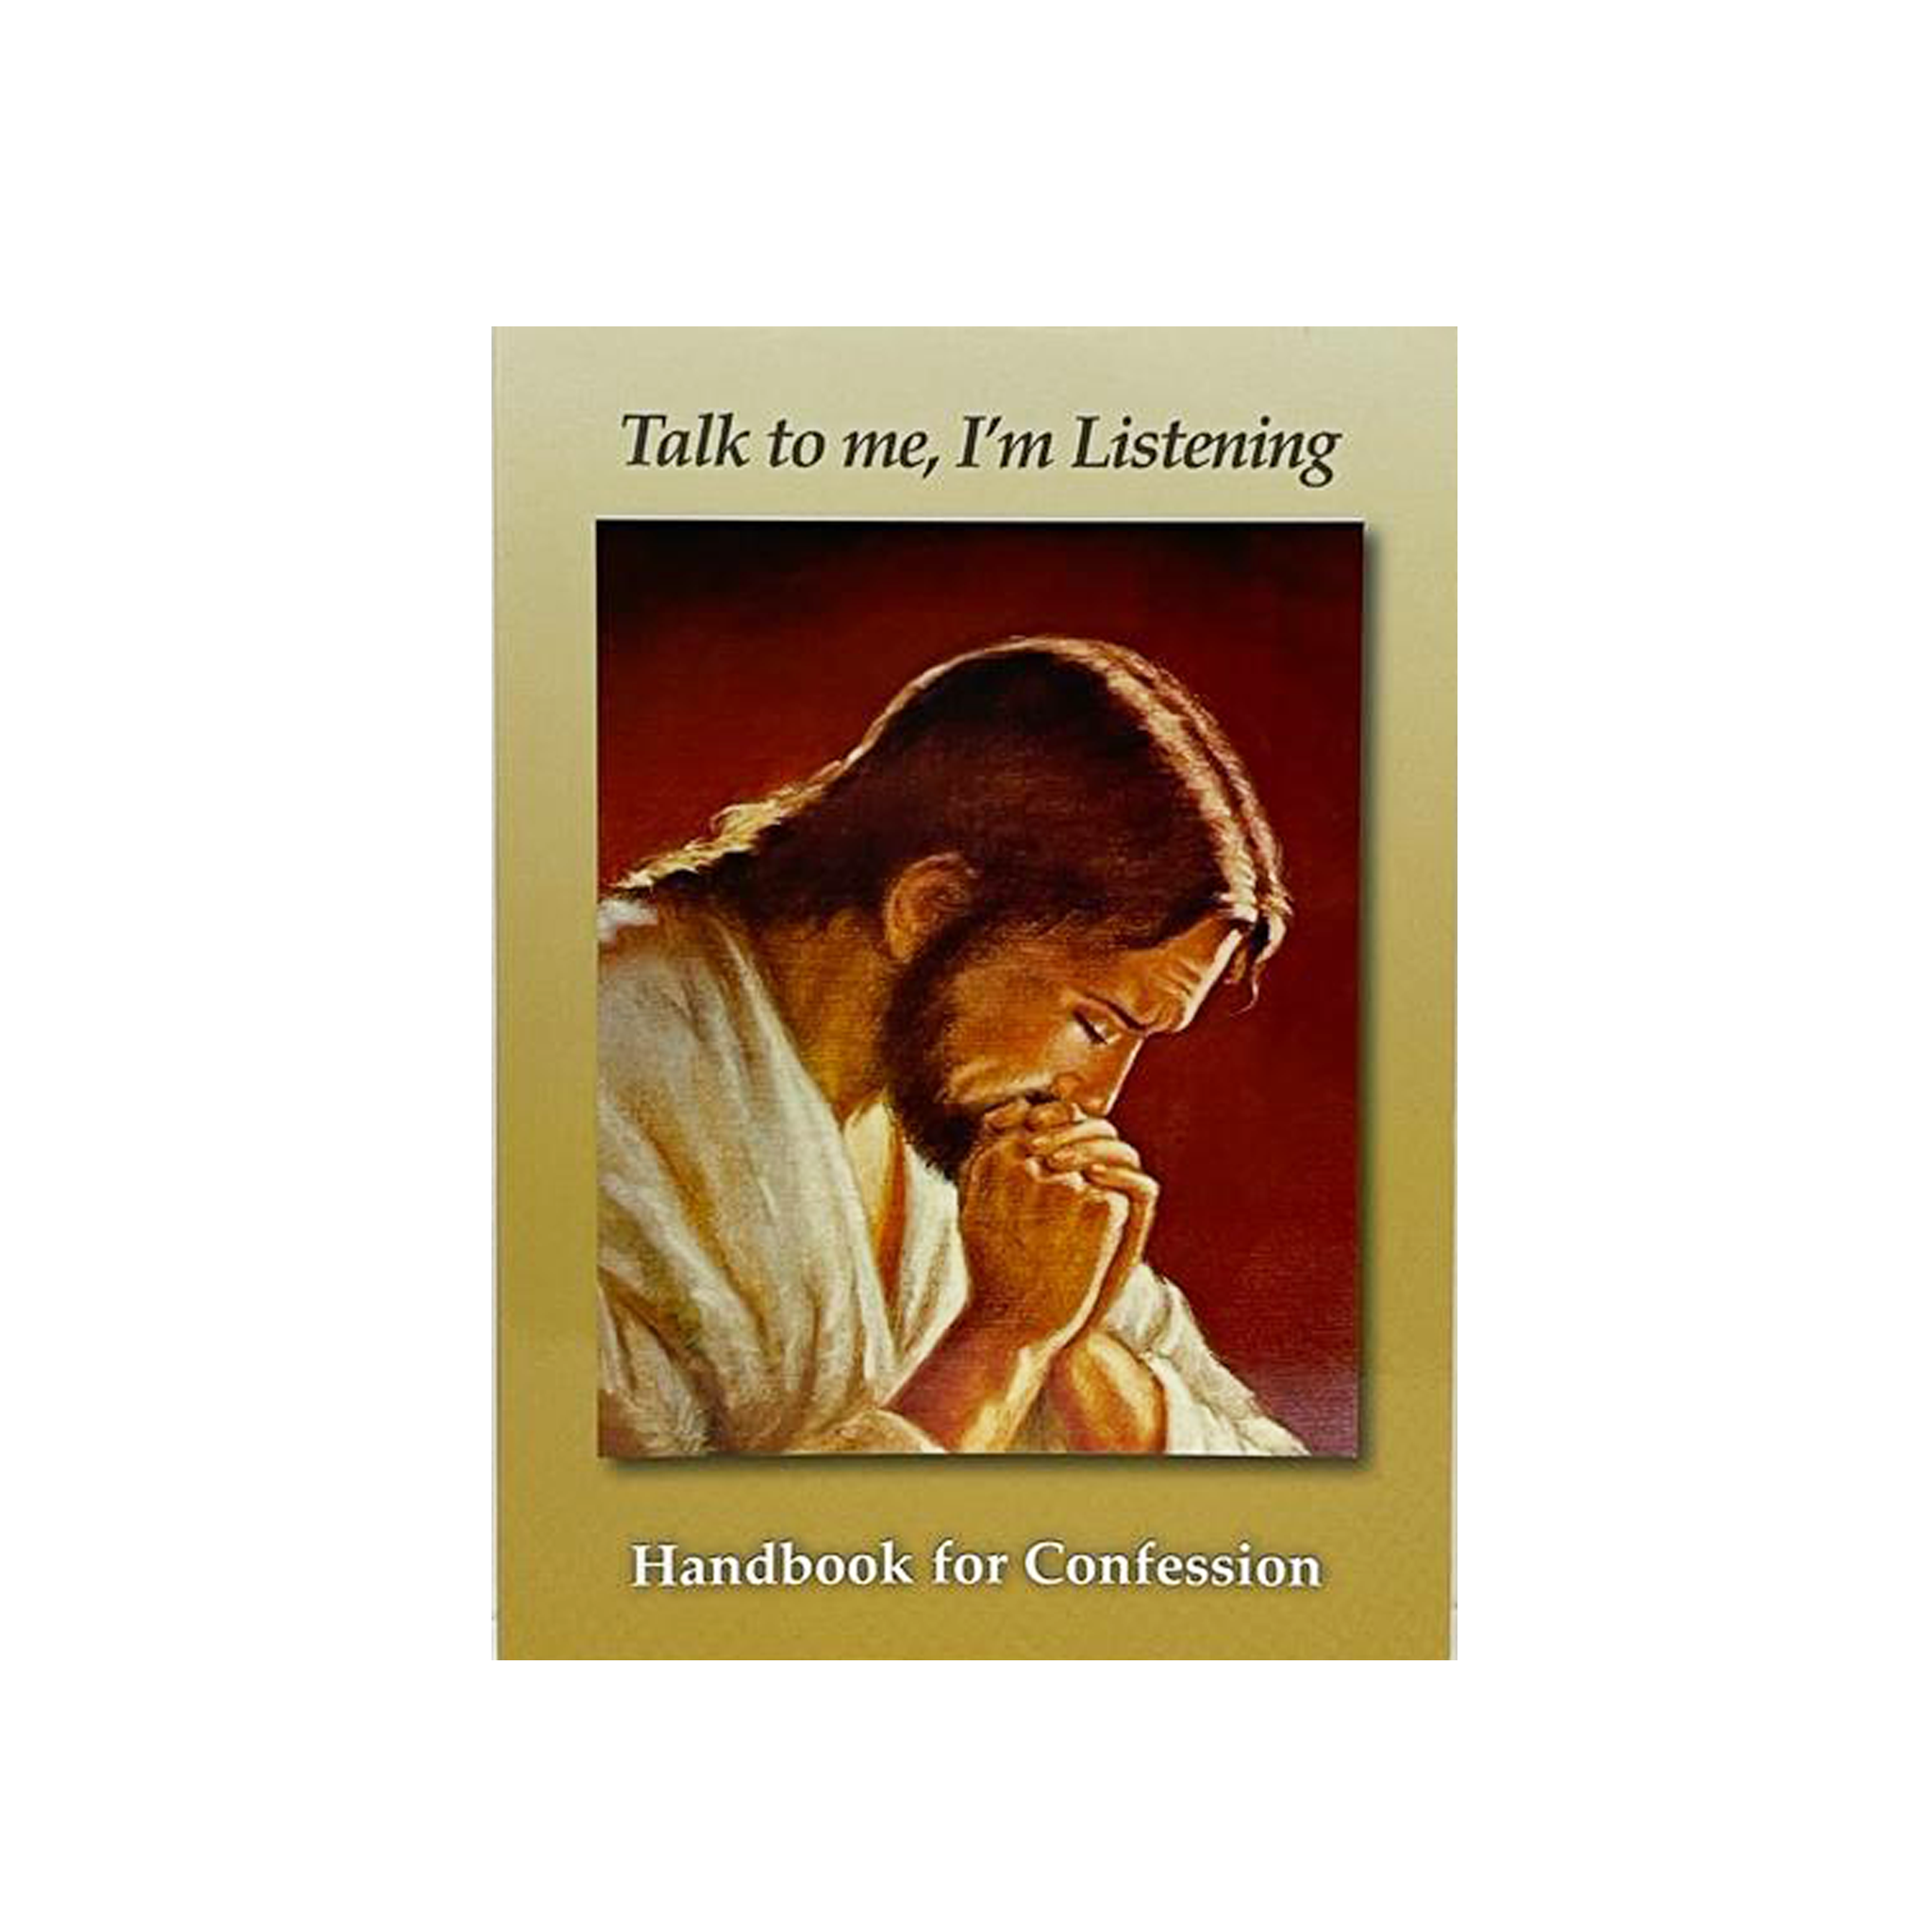 TALK TO ME, I'M LISTENING - HANDBOOK FOR CONFESSION